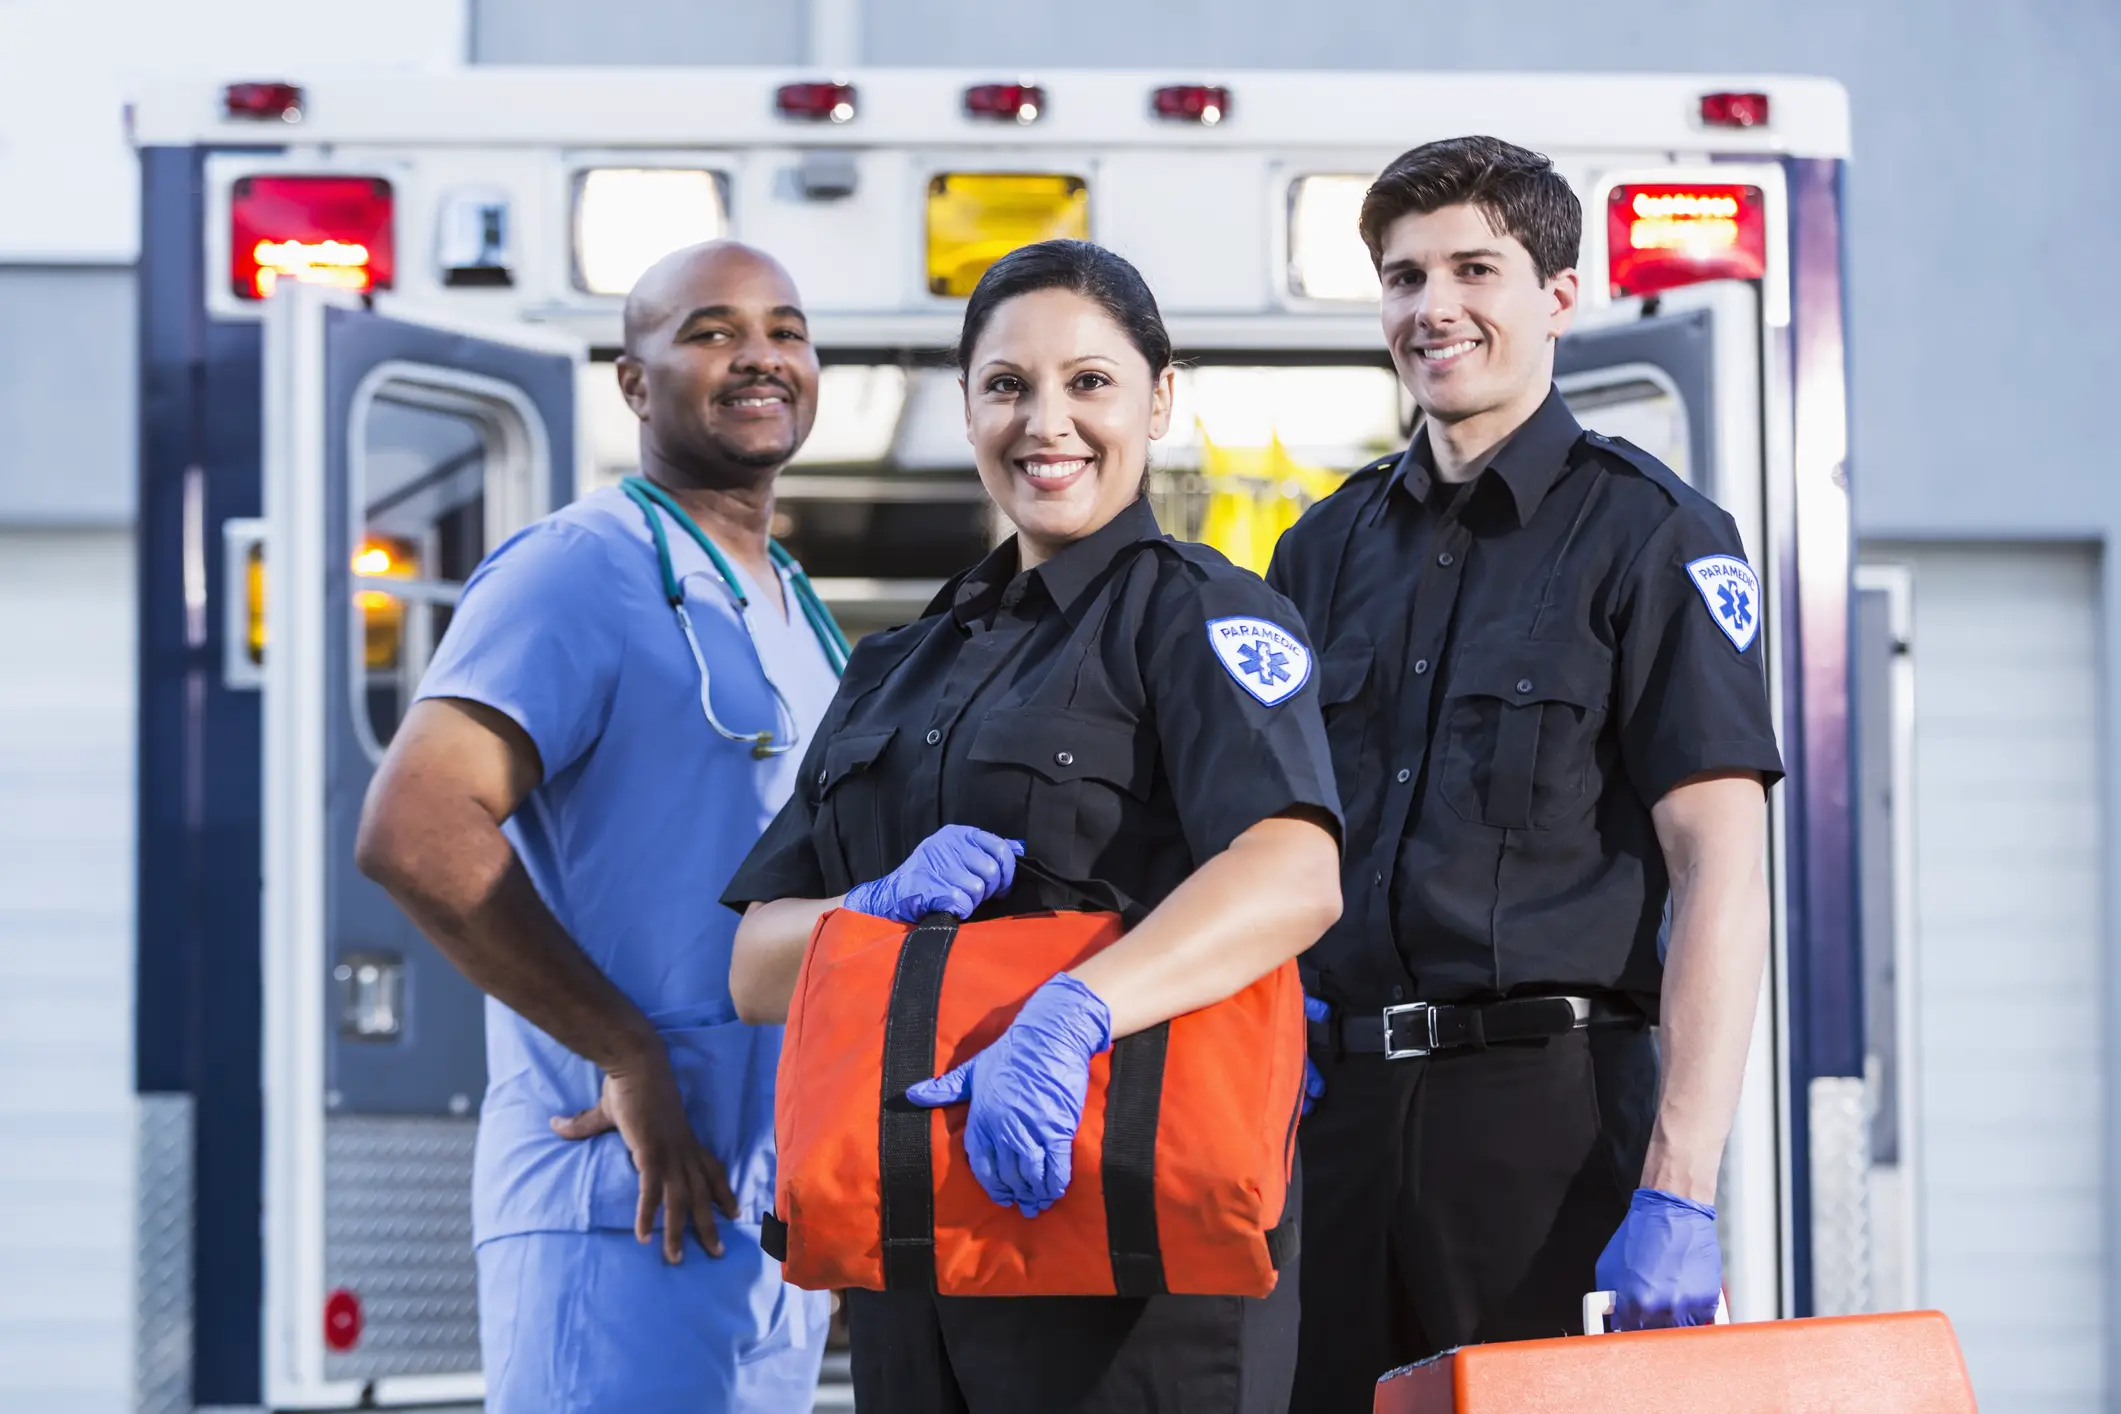 How To Become an EMT - Best Tutorial in 2022